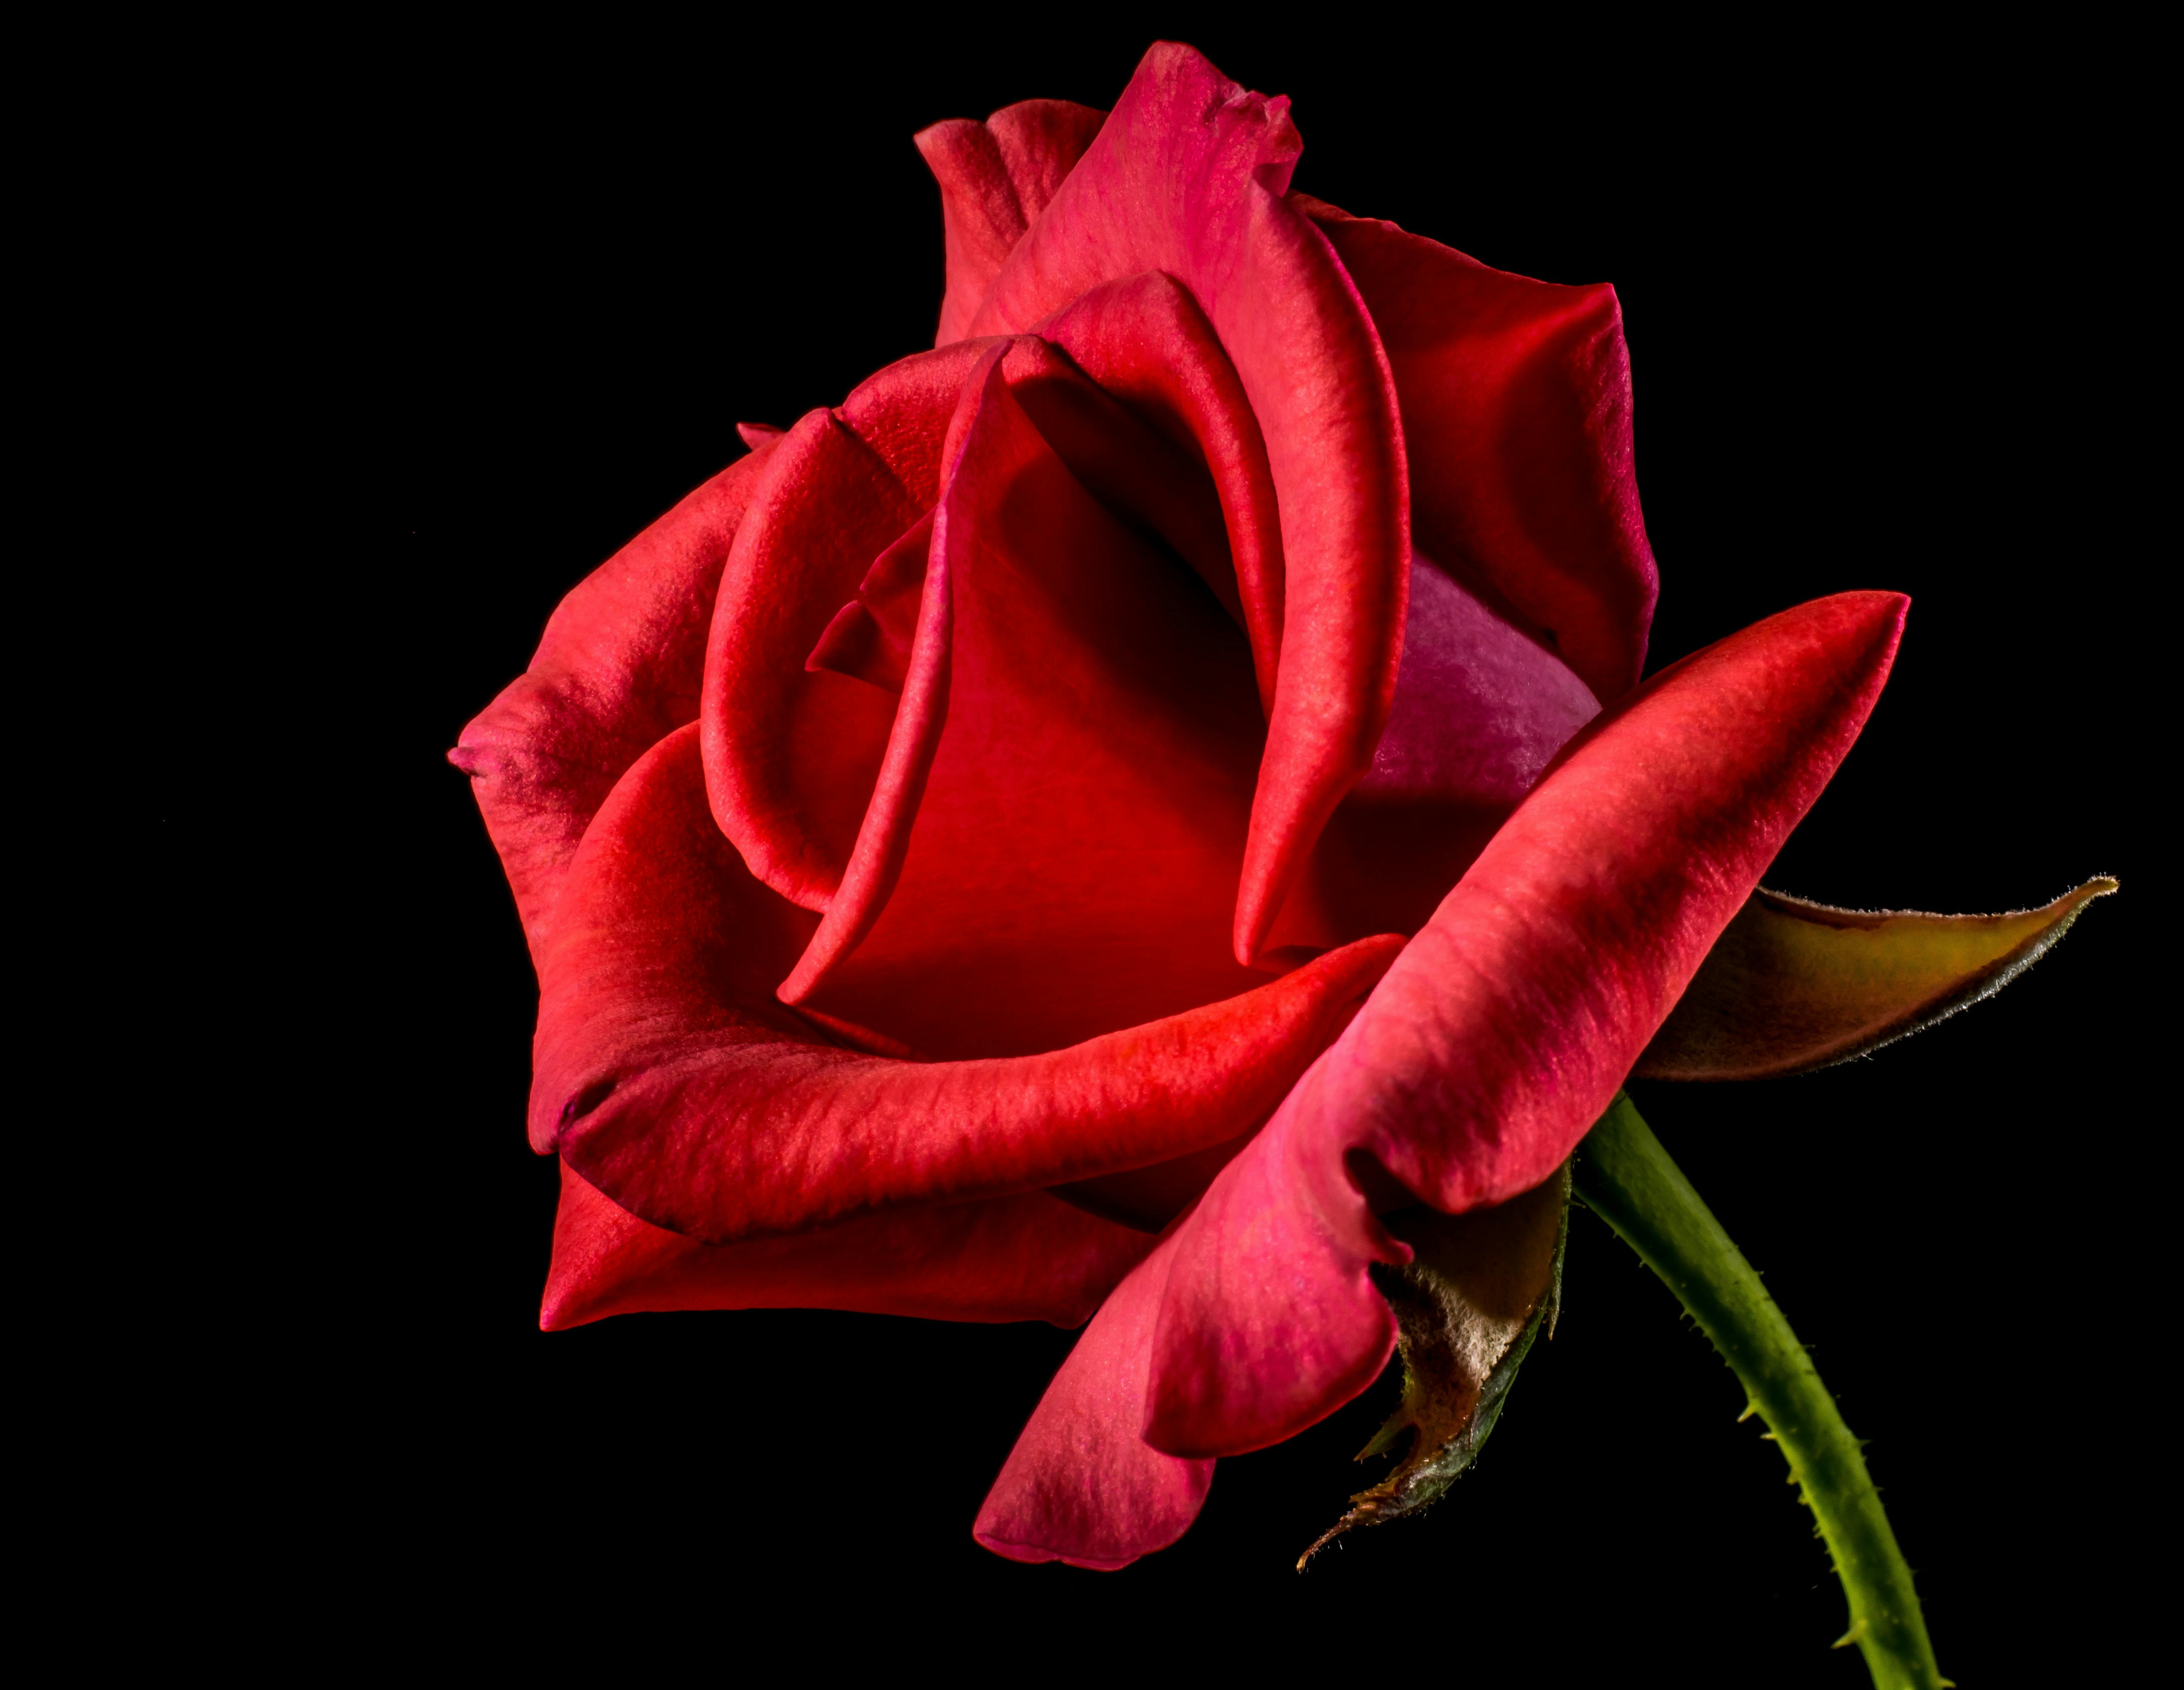 Shallow Focus Photography of Red Rose